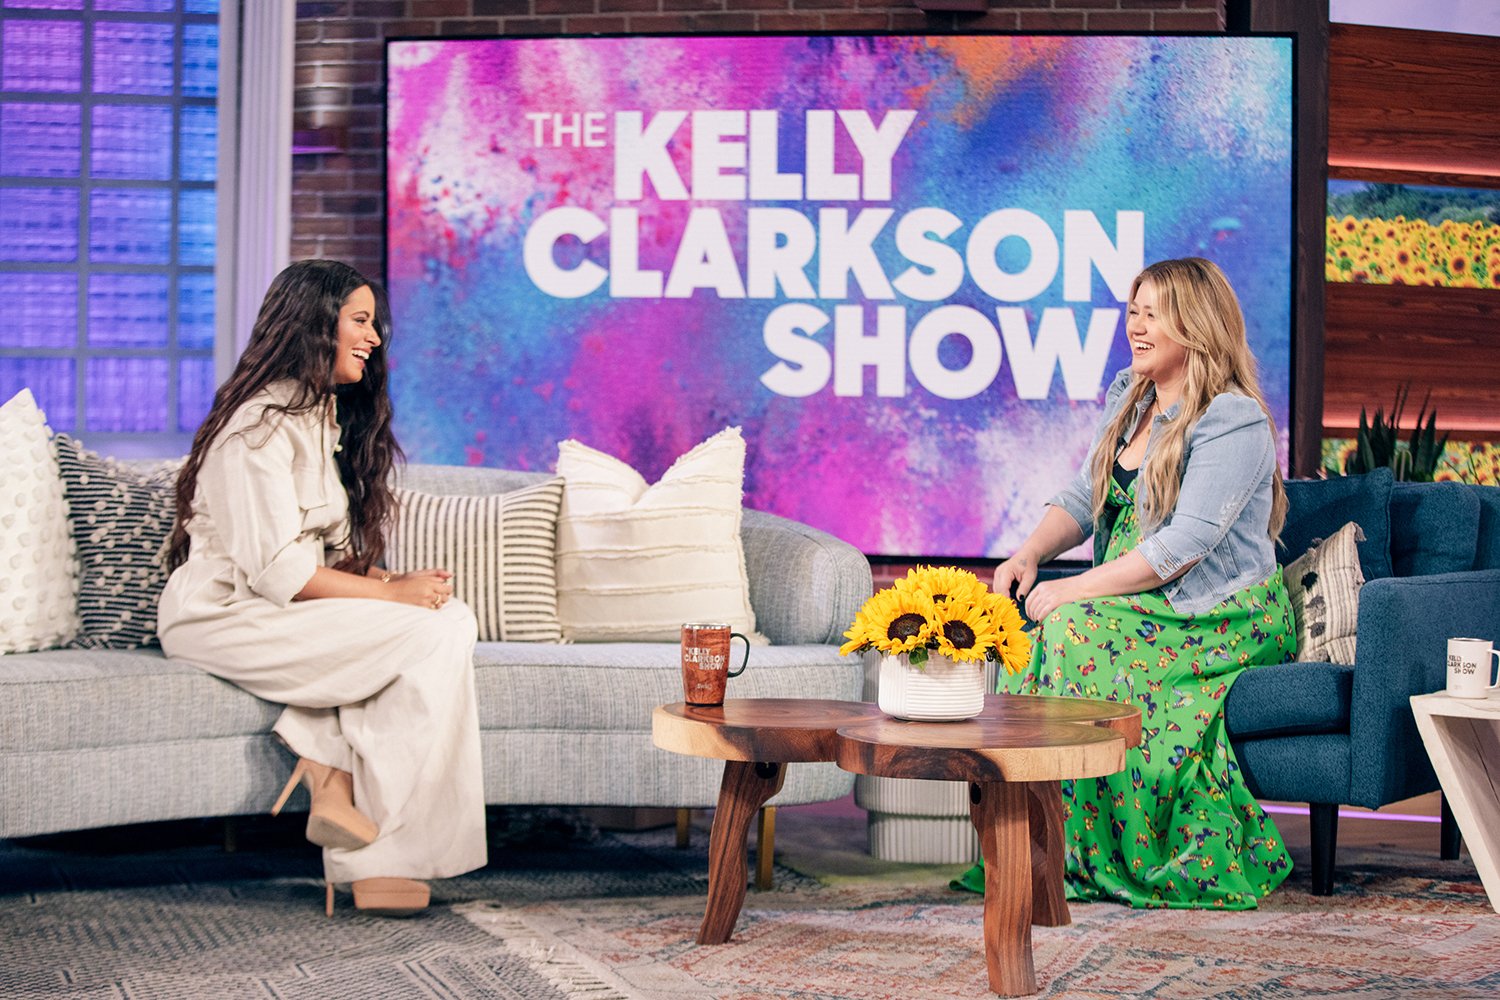 Camila Cabello and Kelly Clarkson on The Kelly Clarkson Show just weeks before Cabello replaced Clarkson on The Voice